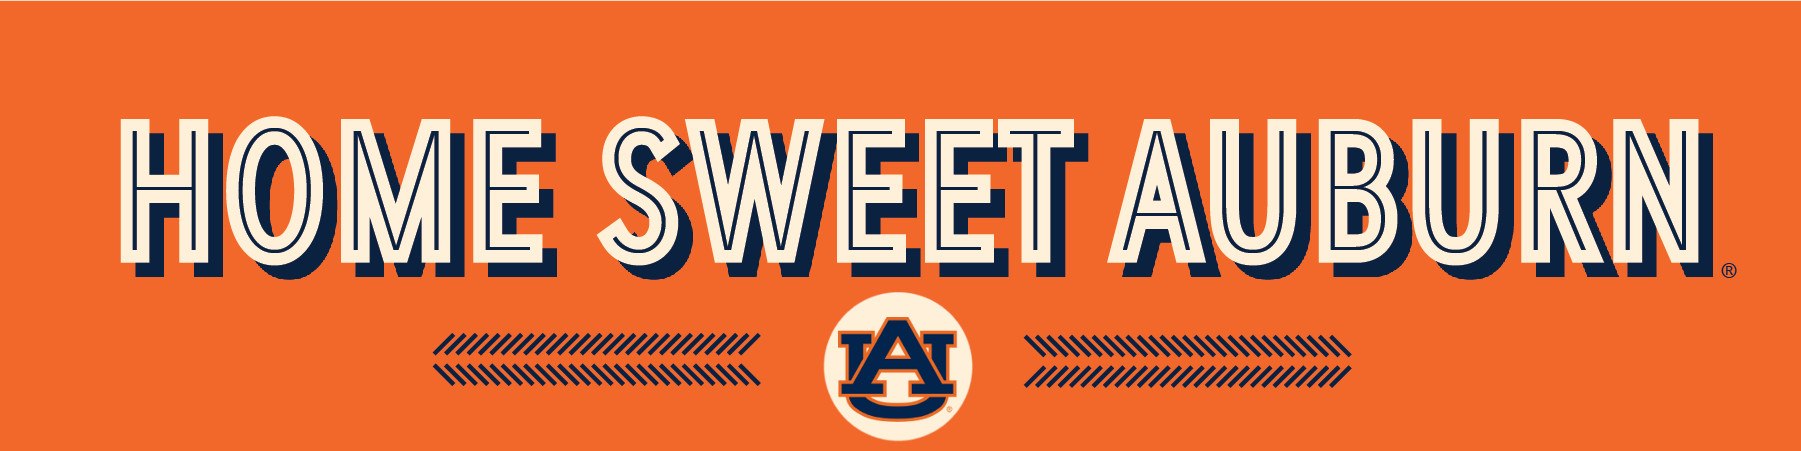 "Home Sweet Auburn" Banner with bold text and interlocking AU logo